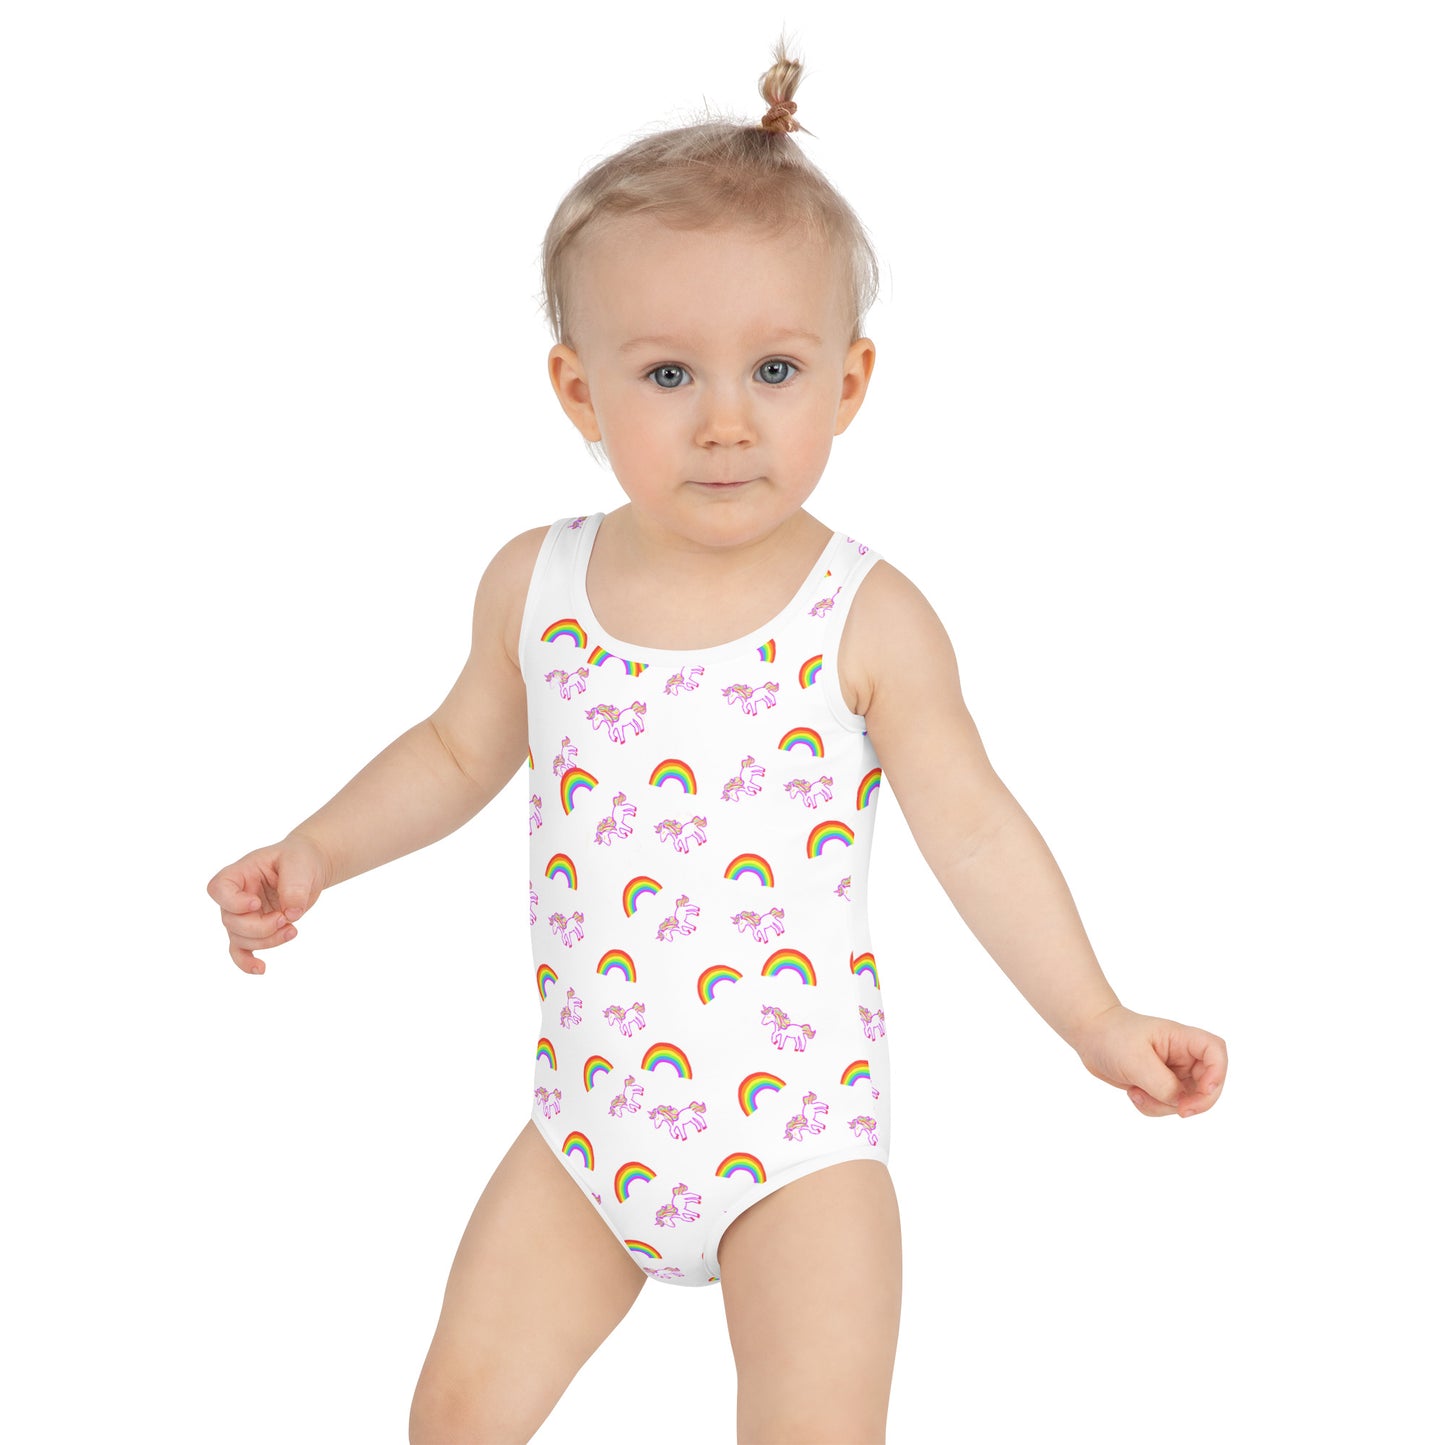 Girls' Athletic Swimsuit One Piece with Rainbows and Unicorns FREE SHIPPING